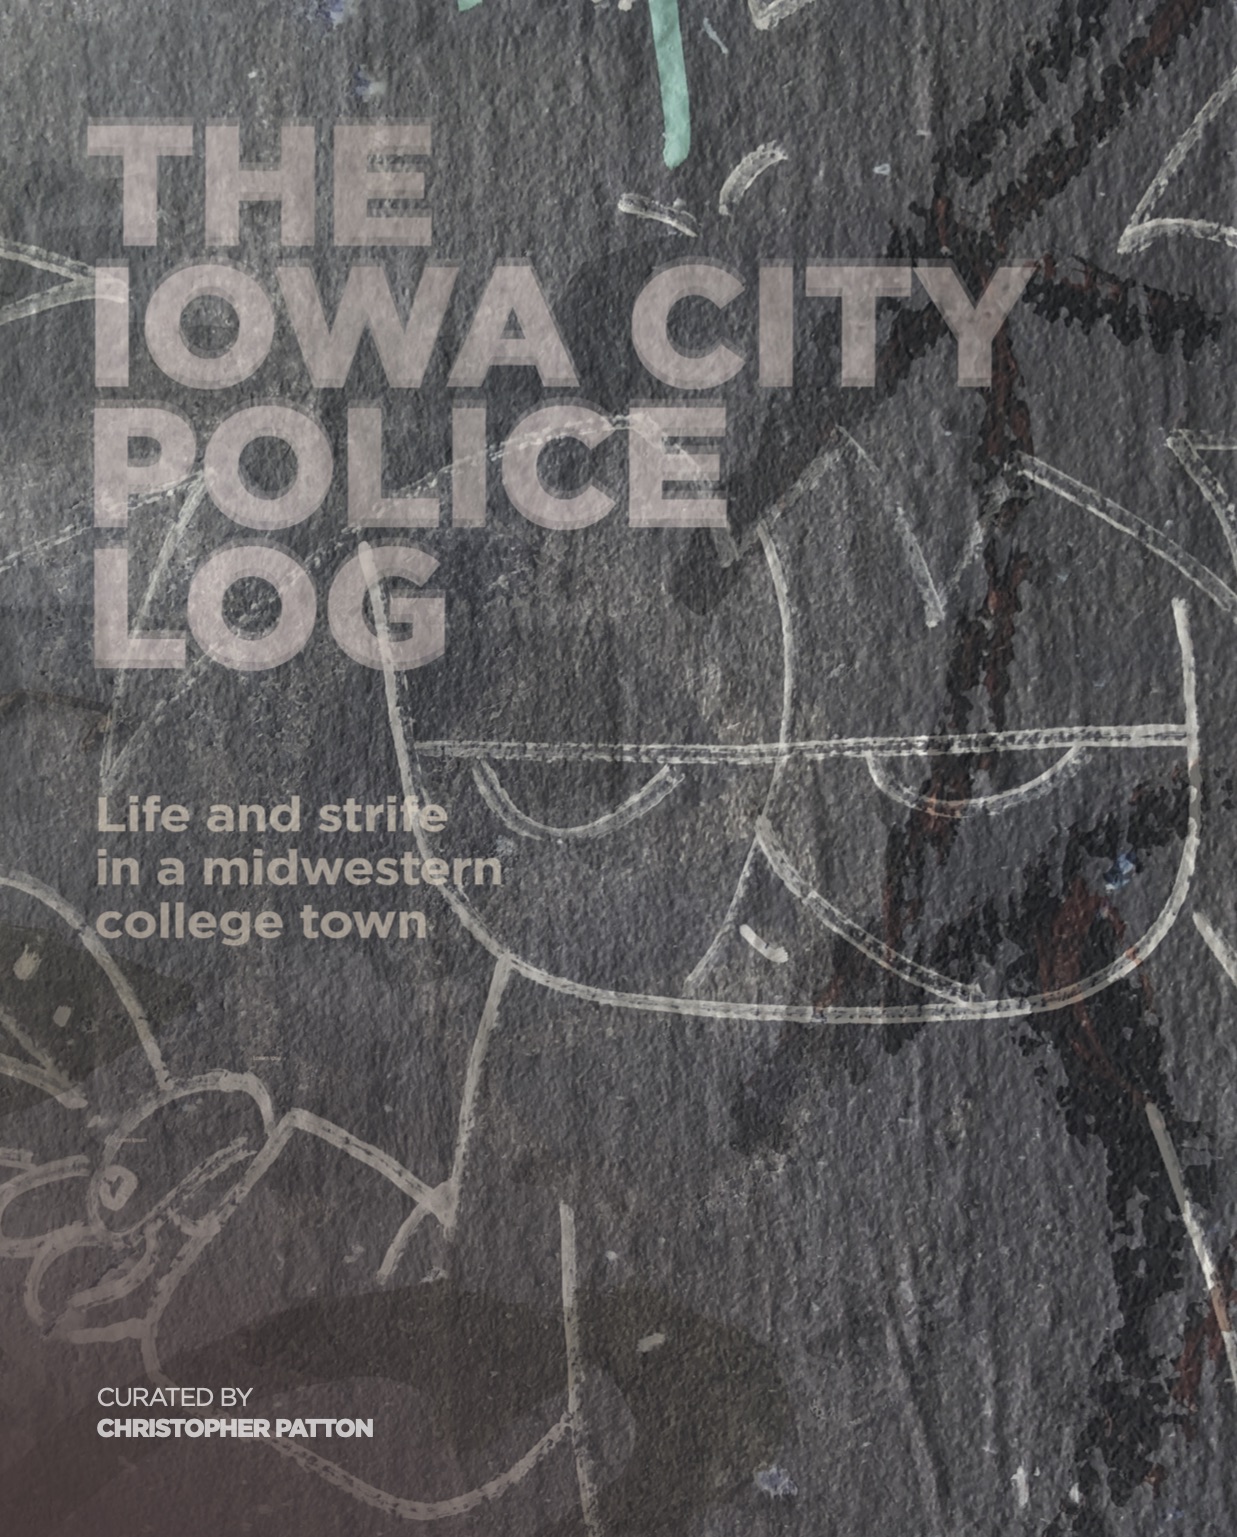 IC Police Log Book Cover